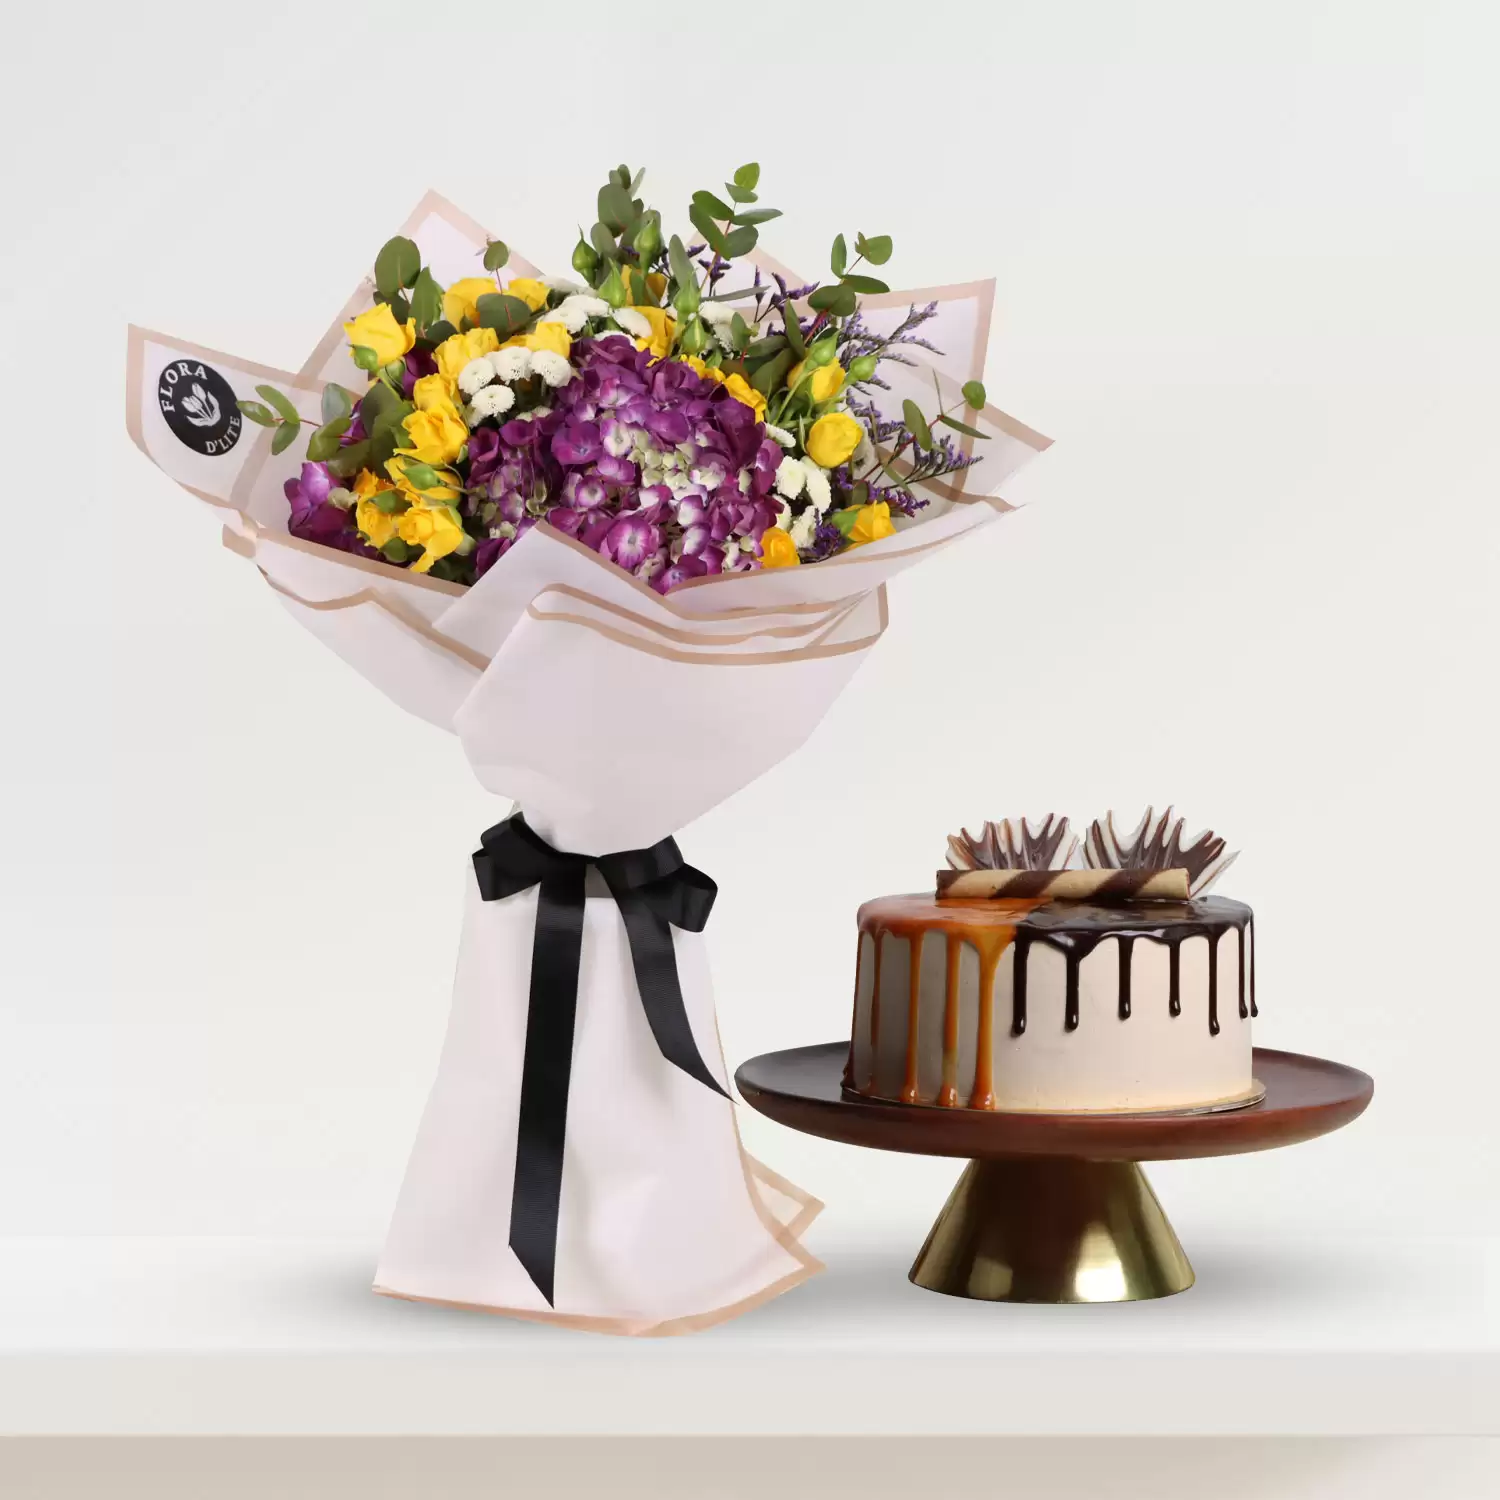 Lush Paradise Bouquet & Coffee Toffee Cake | Online Flowers And Cake In Bahrain - Flora D'lite